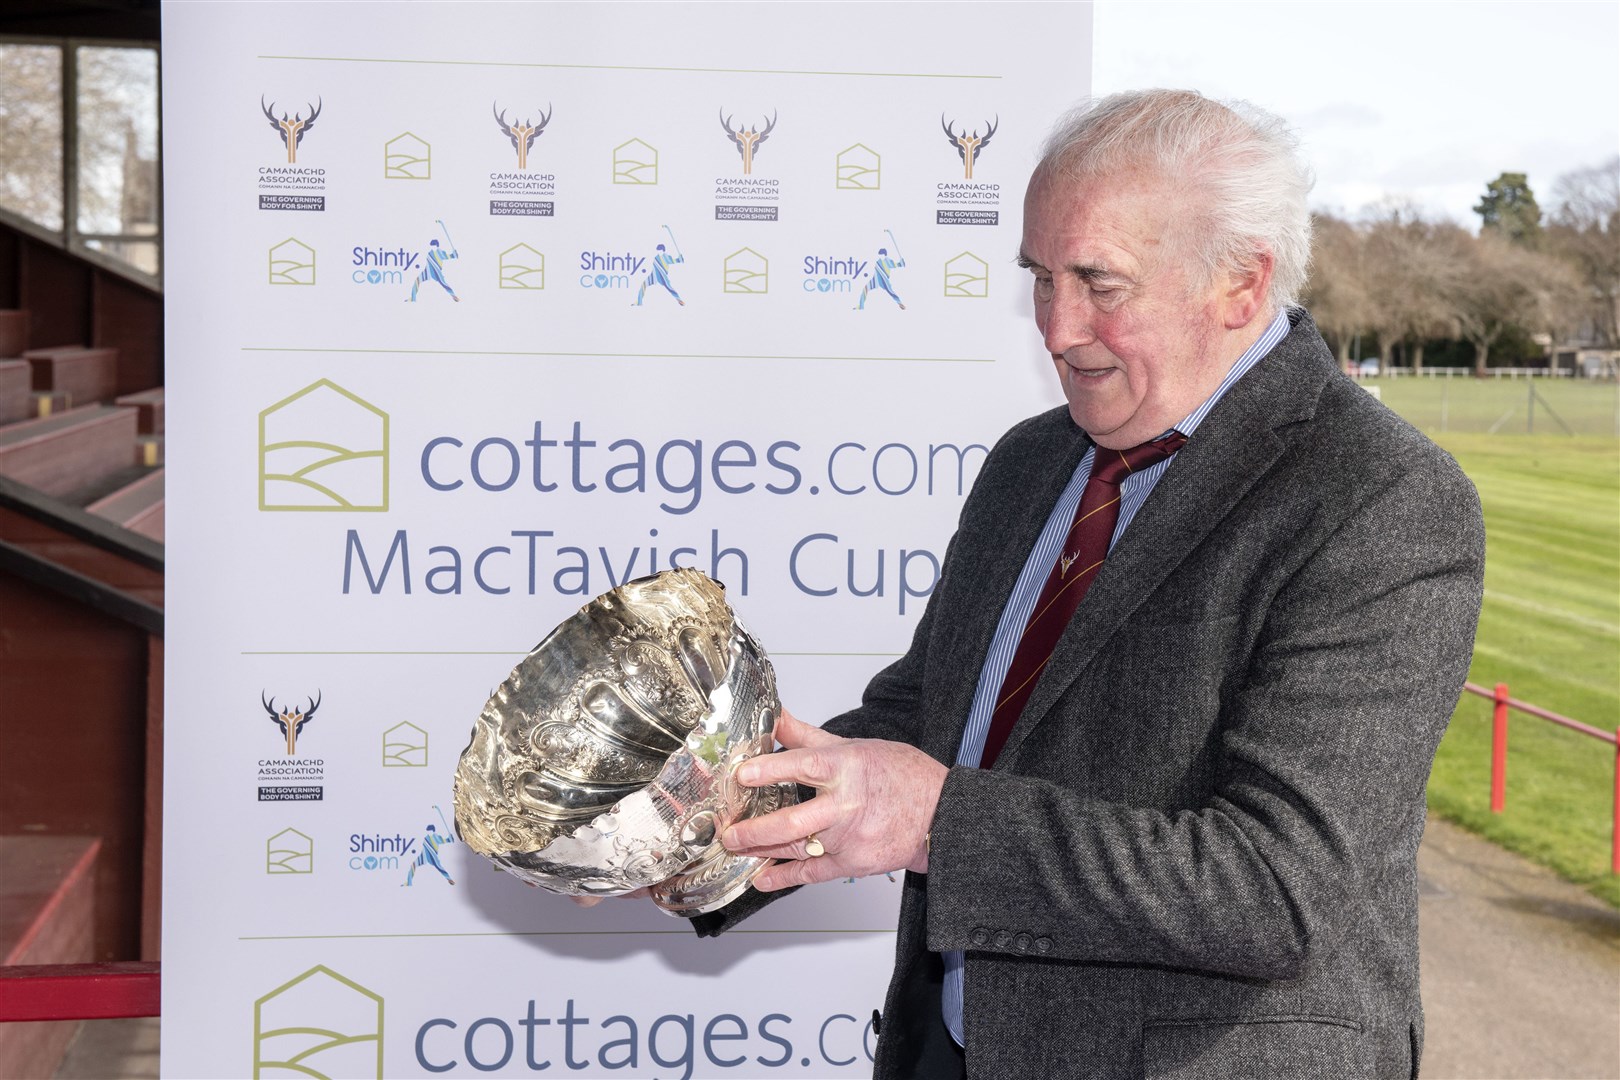 John MacKenzie has the Mactavish Cup back in his hands having captained Newtonmore to claiming the silverware in 1968.